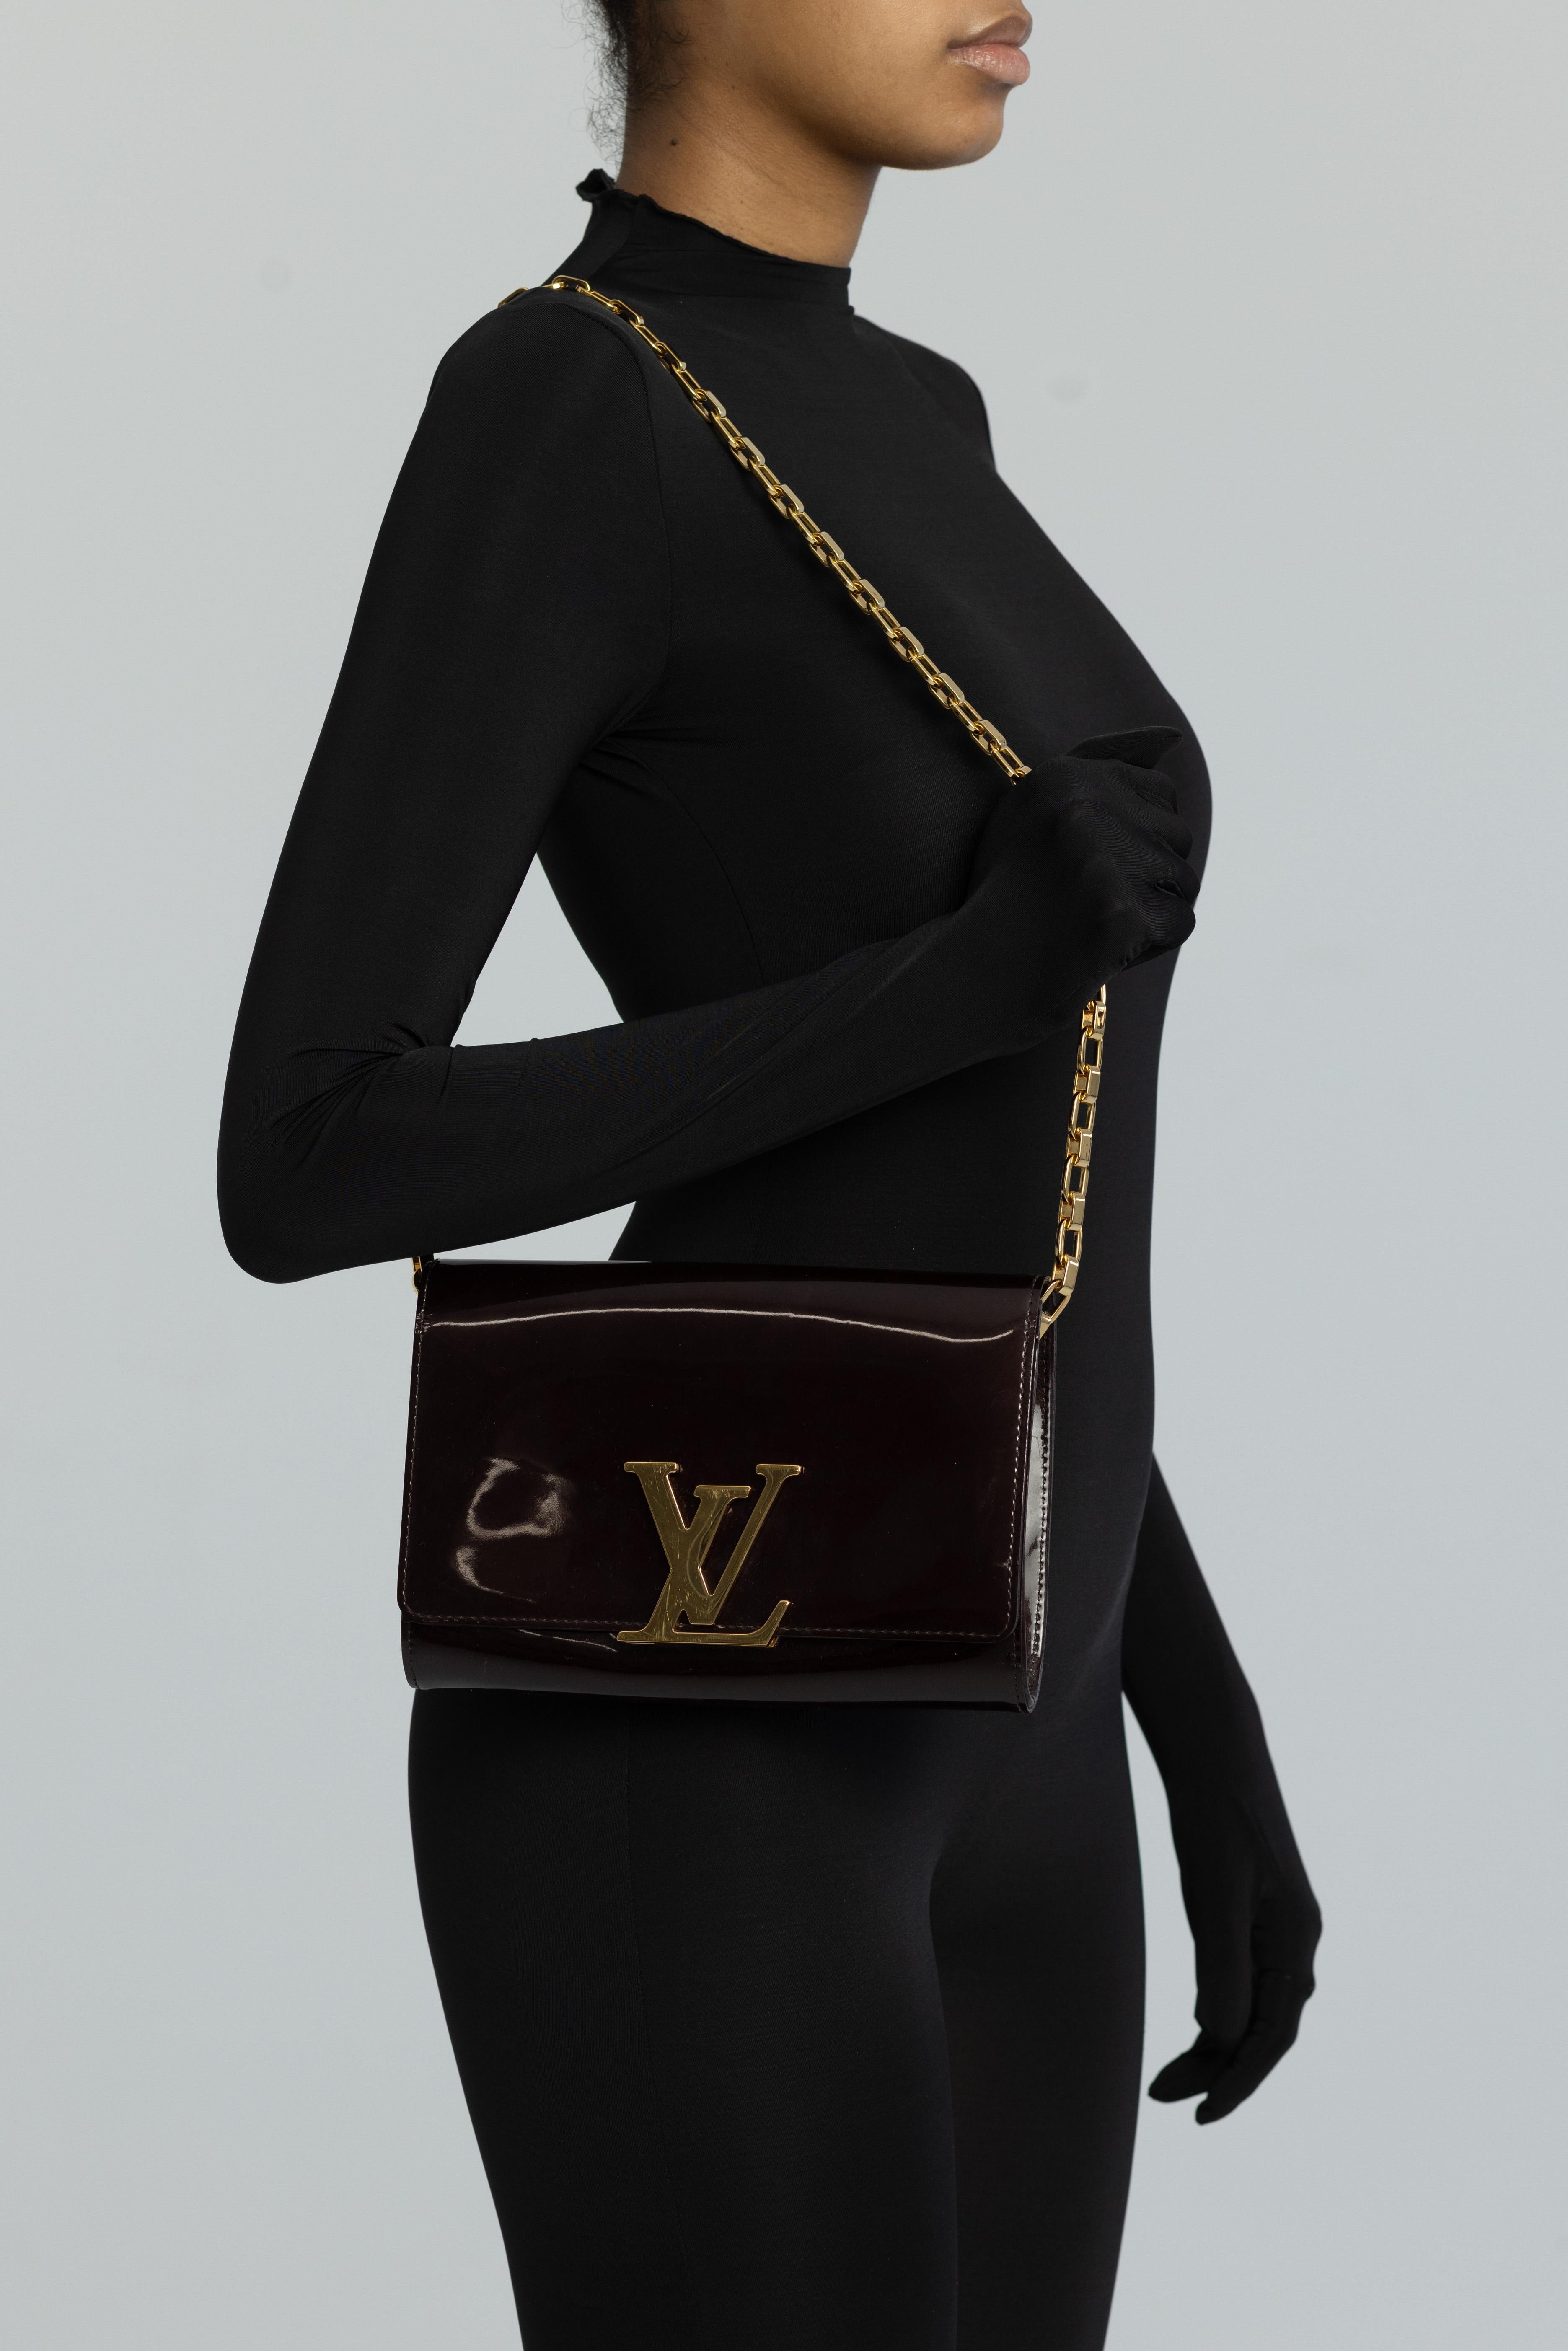 Louis Vuitton Vernis Leather Chain Louise GM Bag For Sale 7